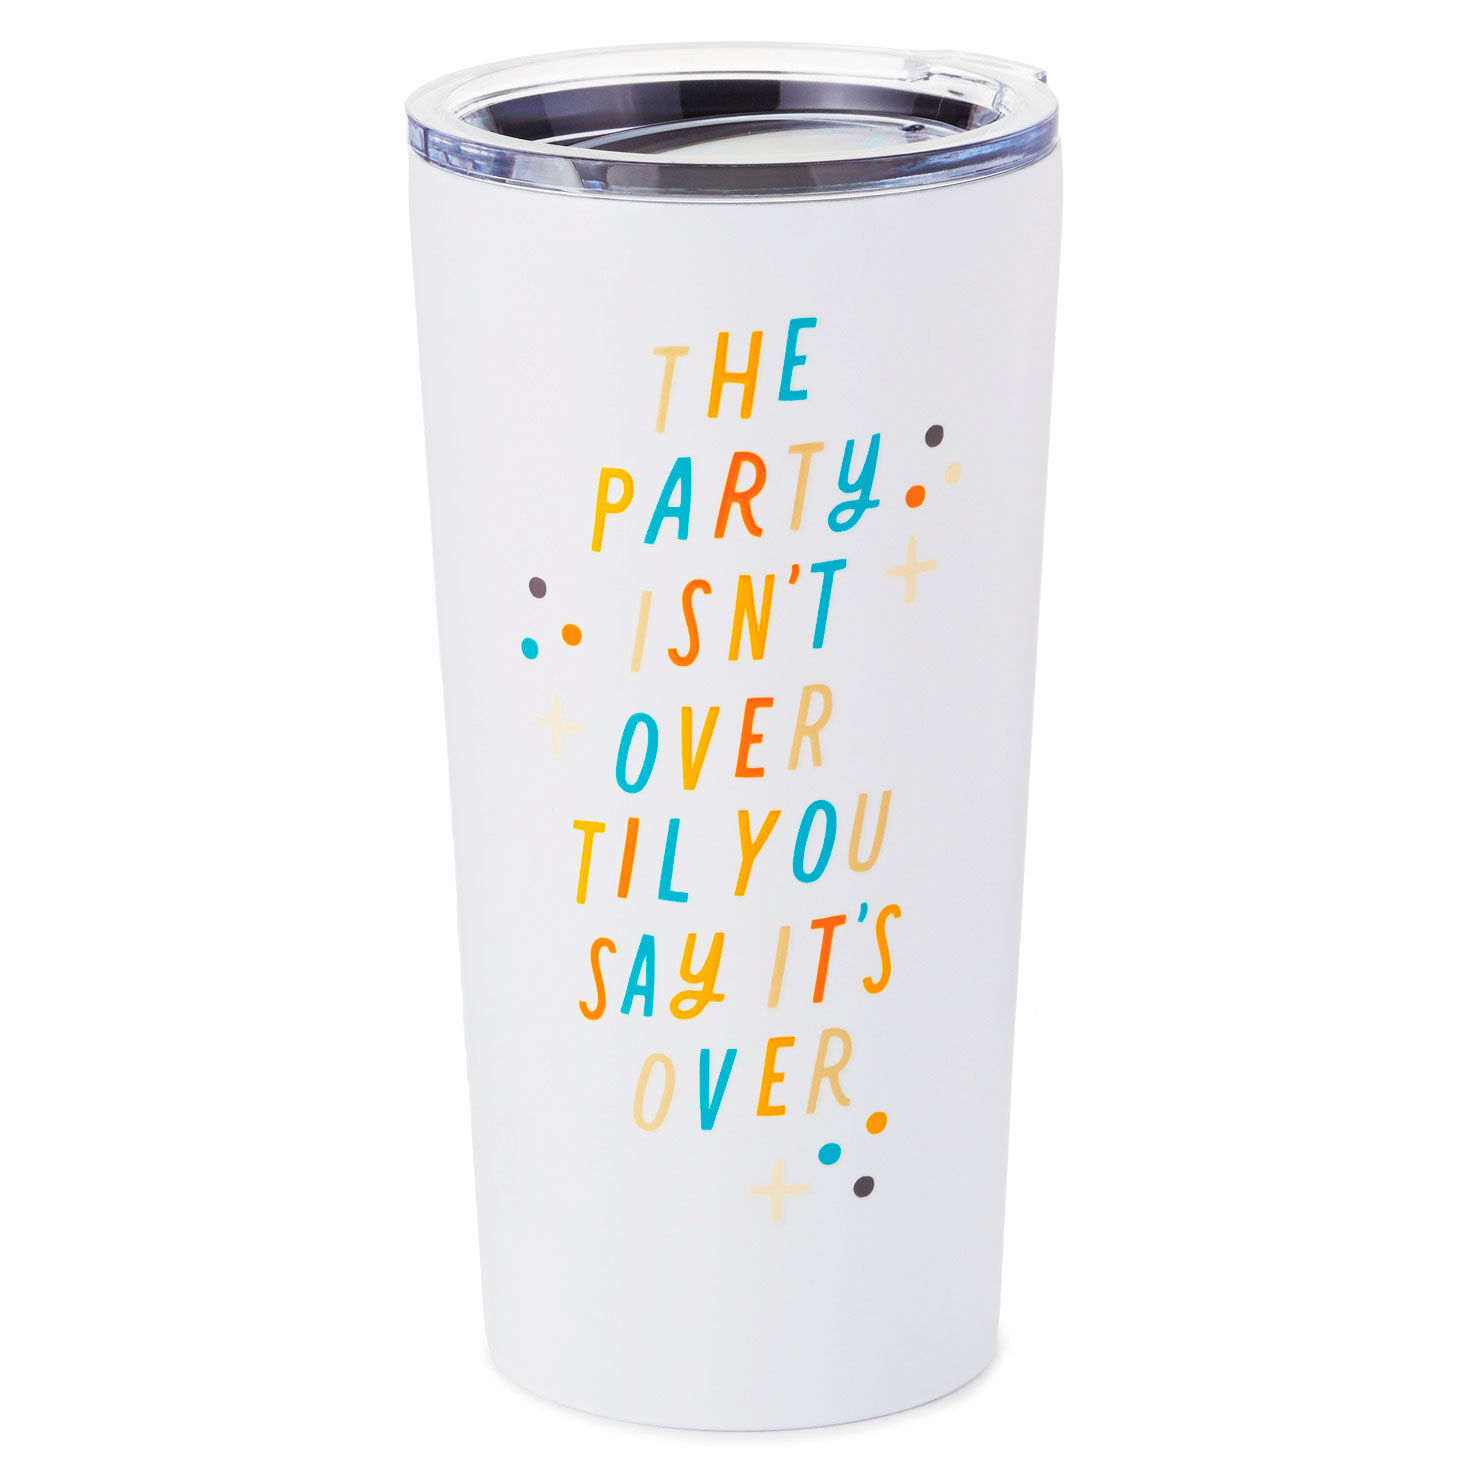 Let's not a spill of our tumbler spoil our day! #stanley #tumbler